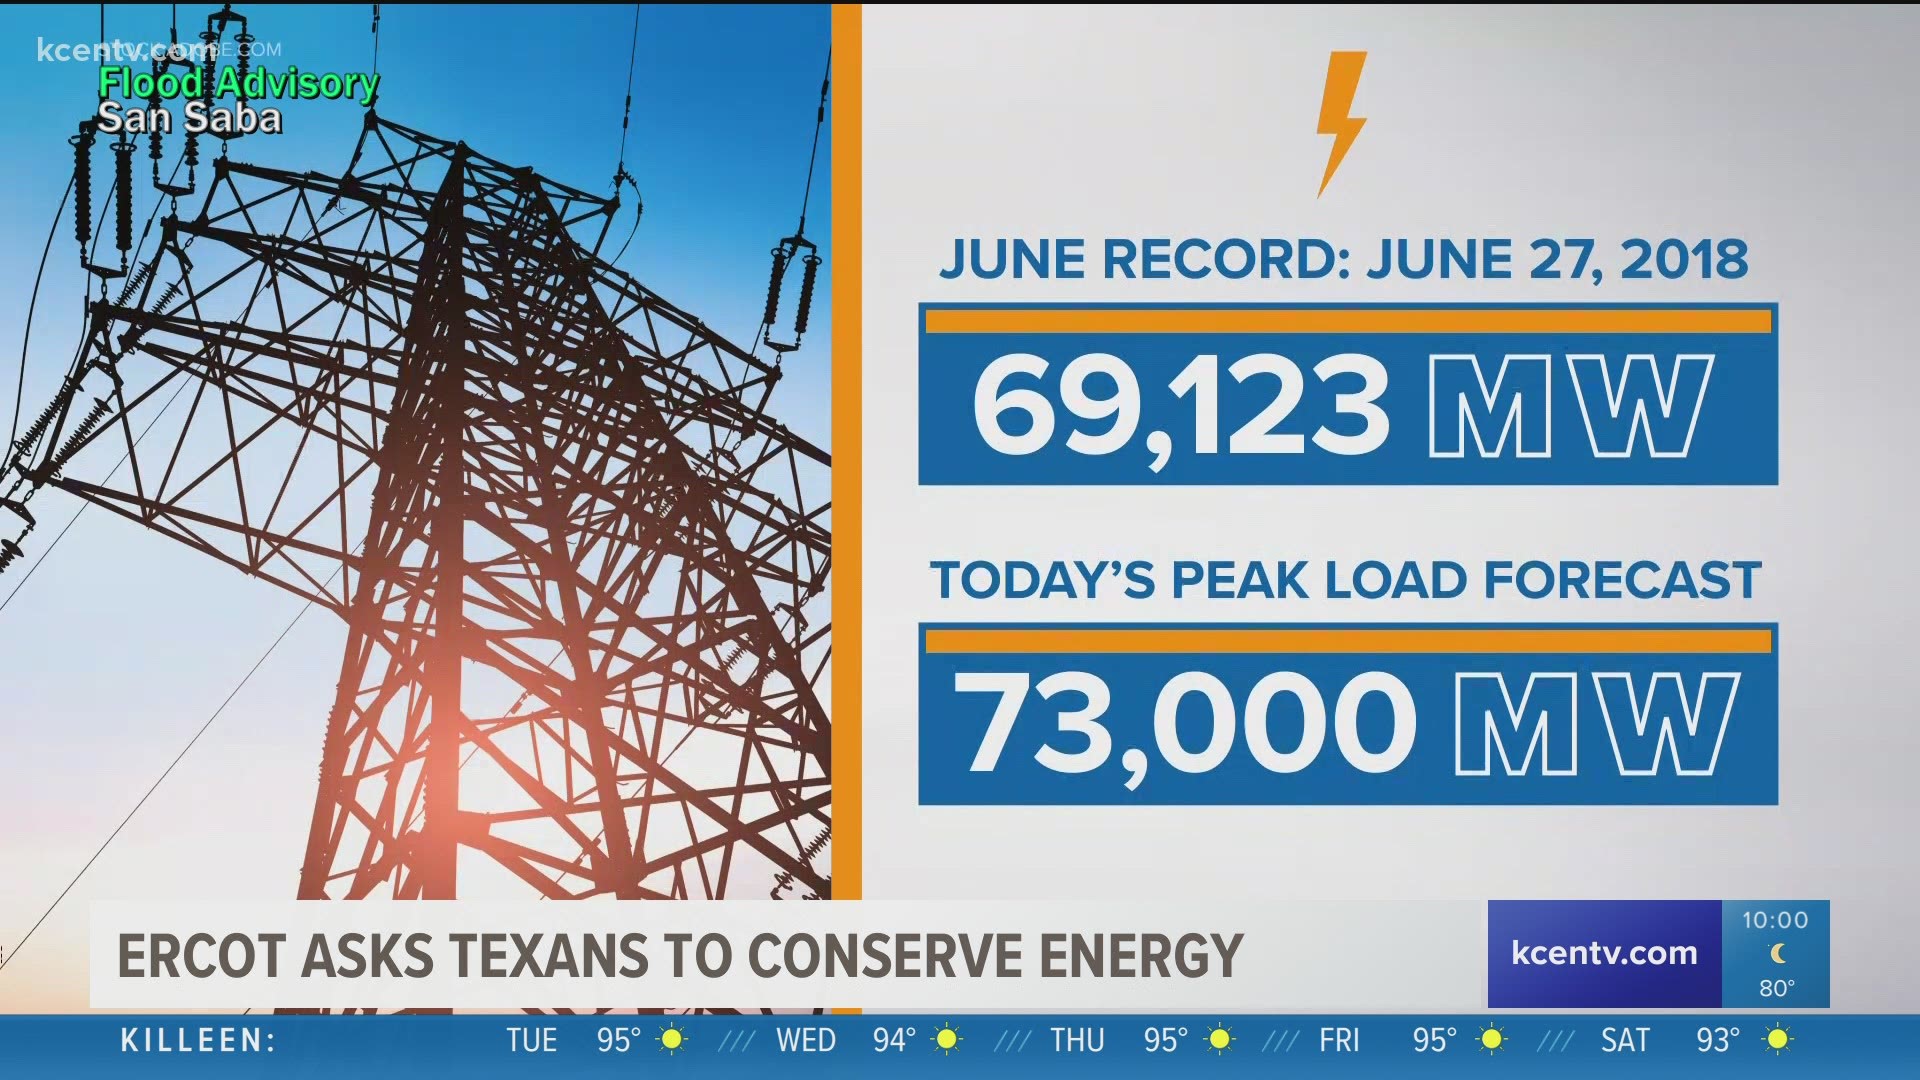 Officials said they did not anticipate rolling blackouts due to increased demand, but asked Texans to reduce energy use.